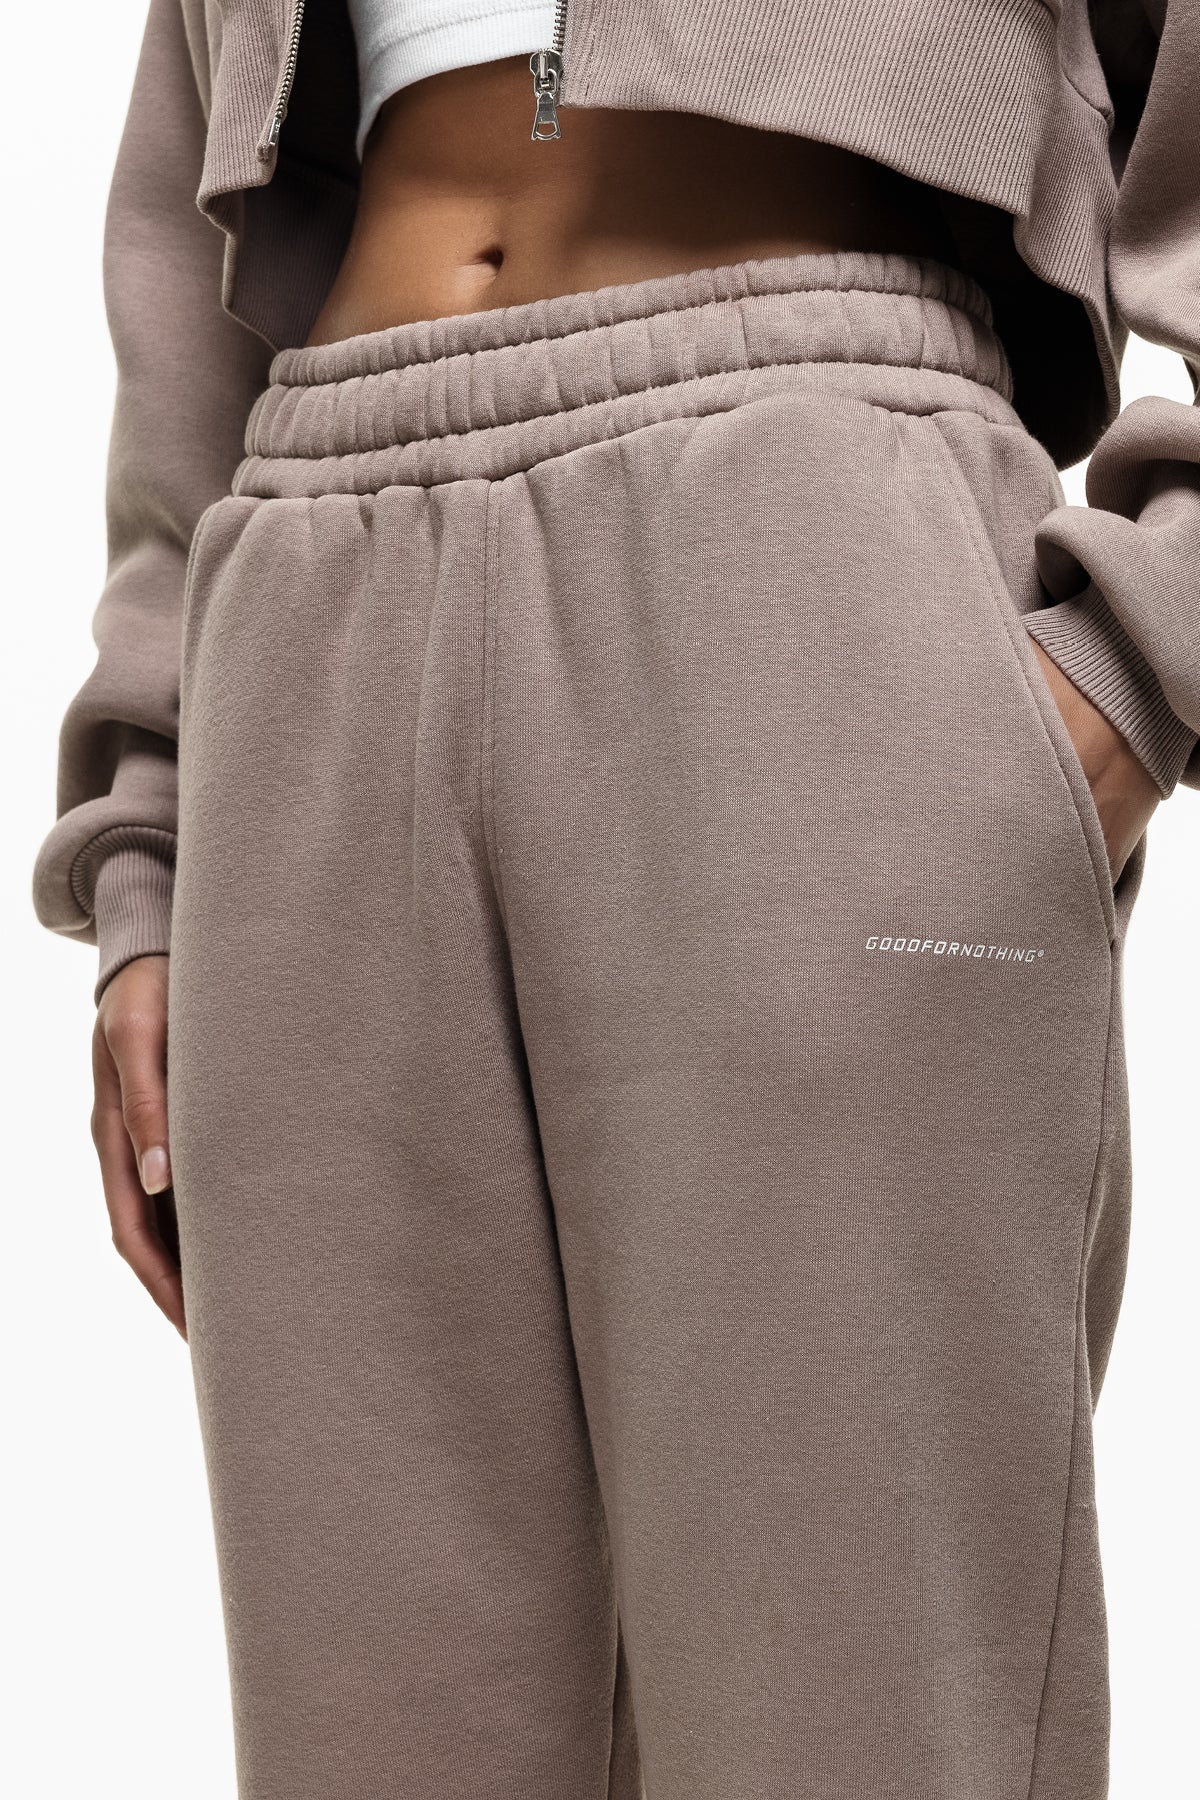 Essential Taupe Jogger